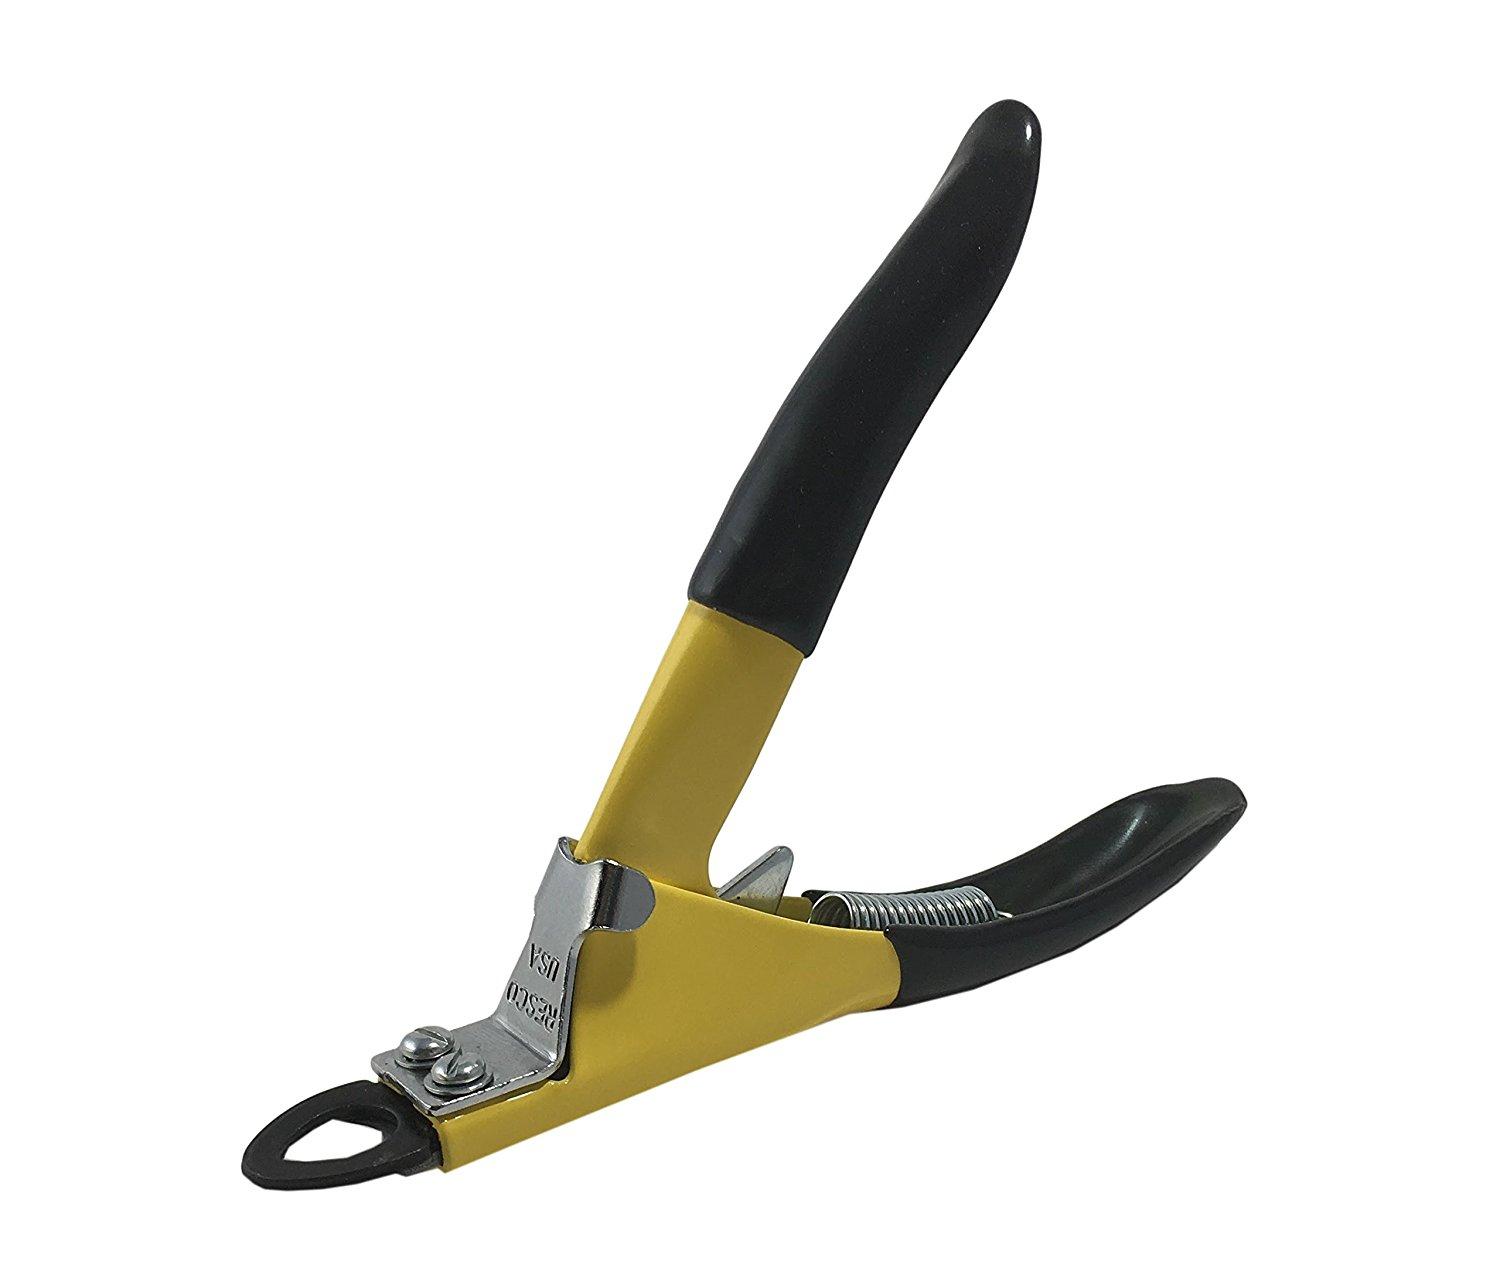 Resco Deluxe Guillotine Nail Clipper, Yellow, Large